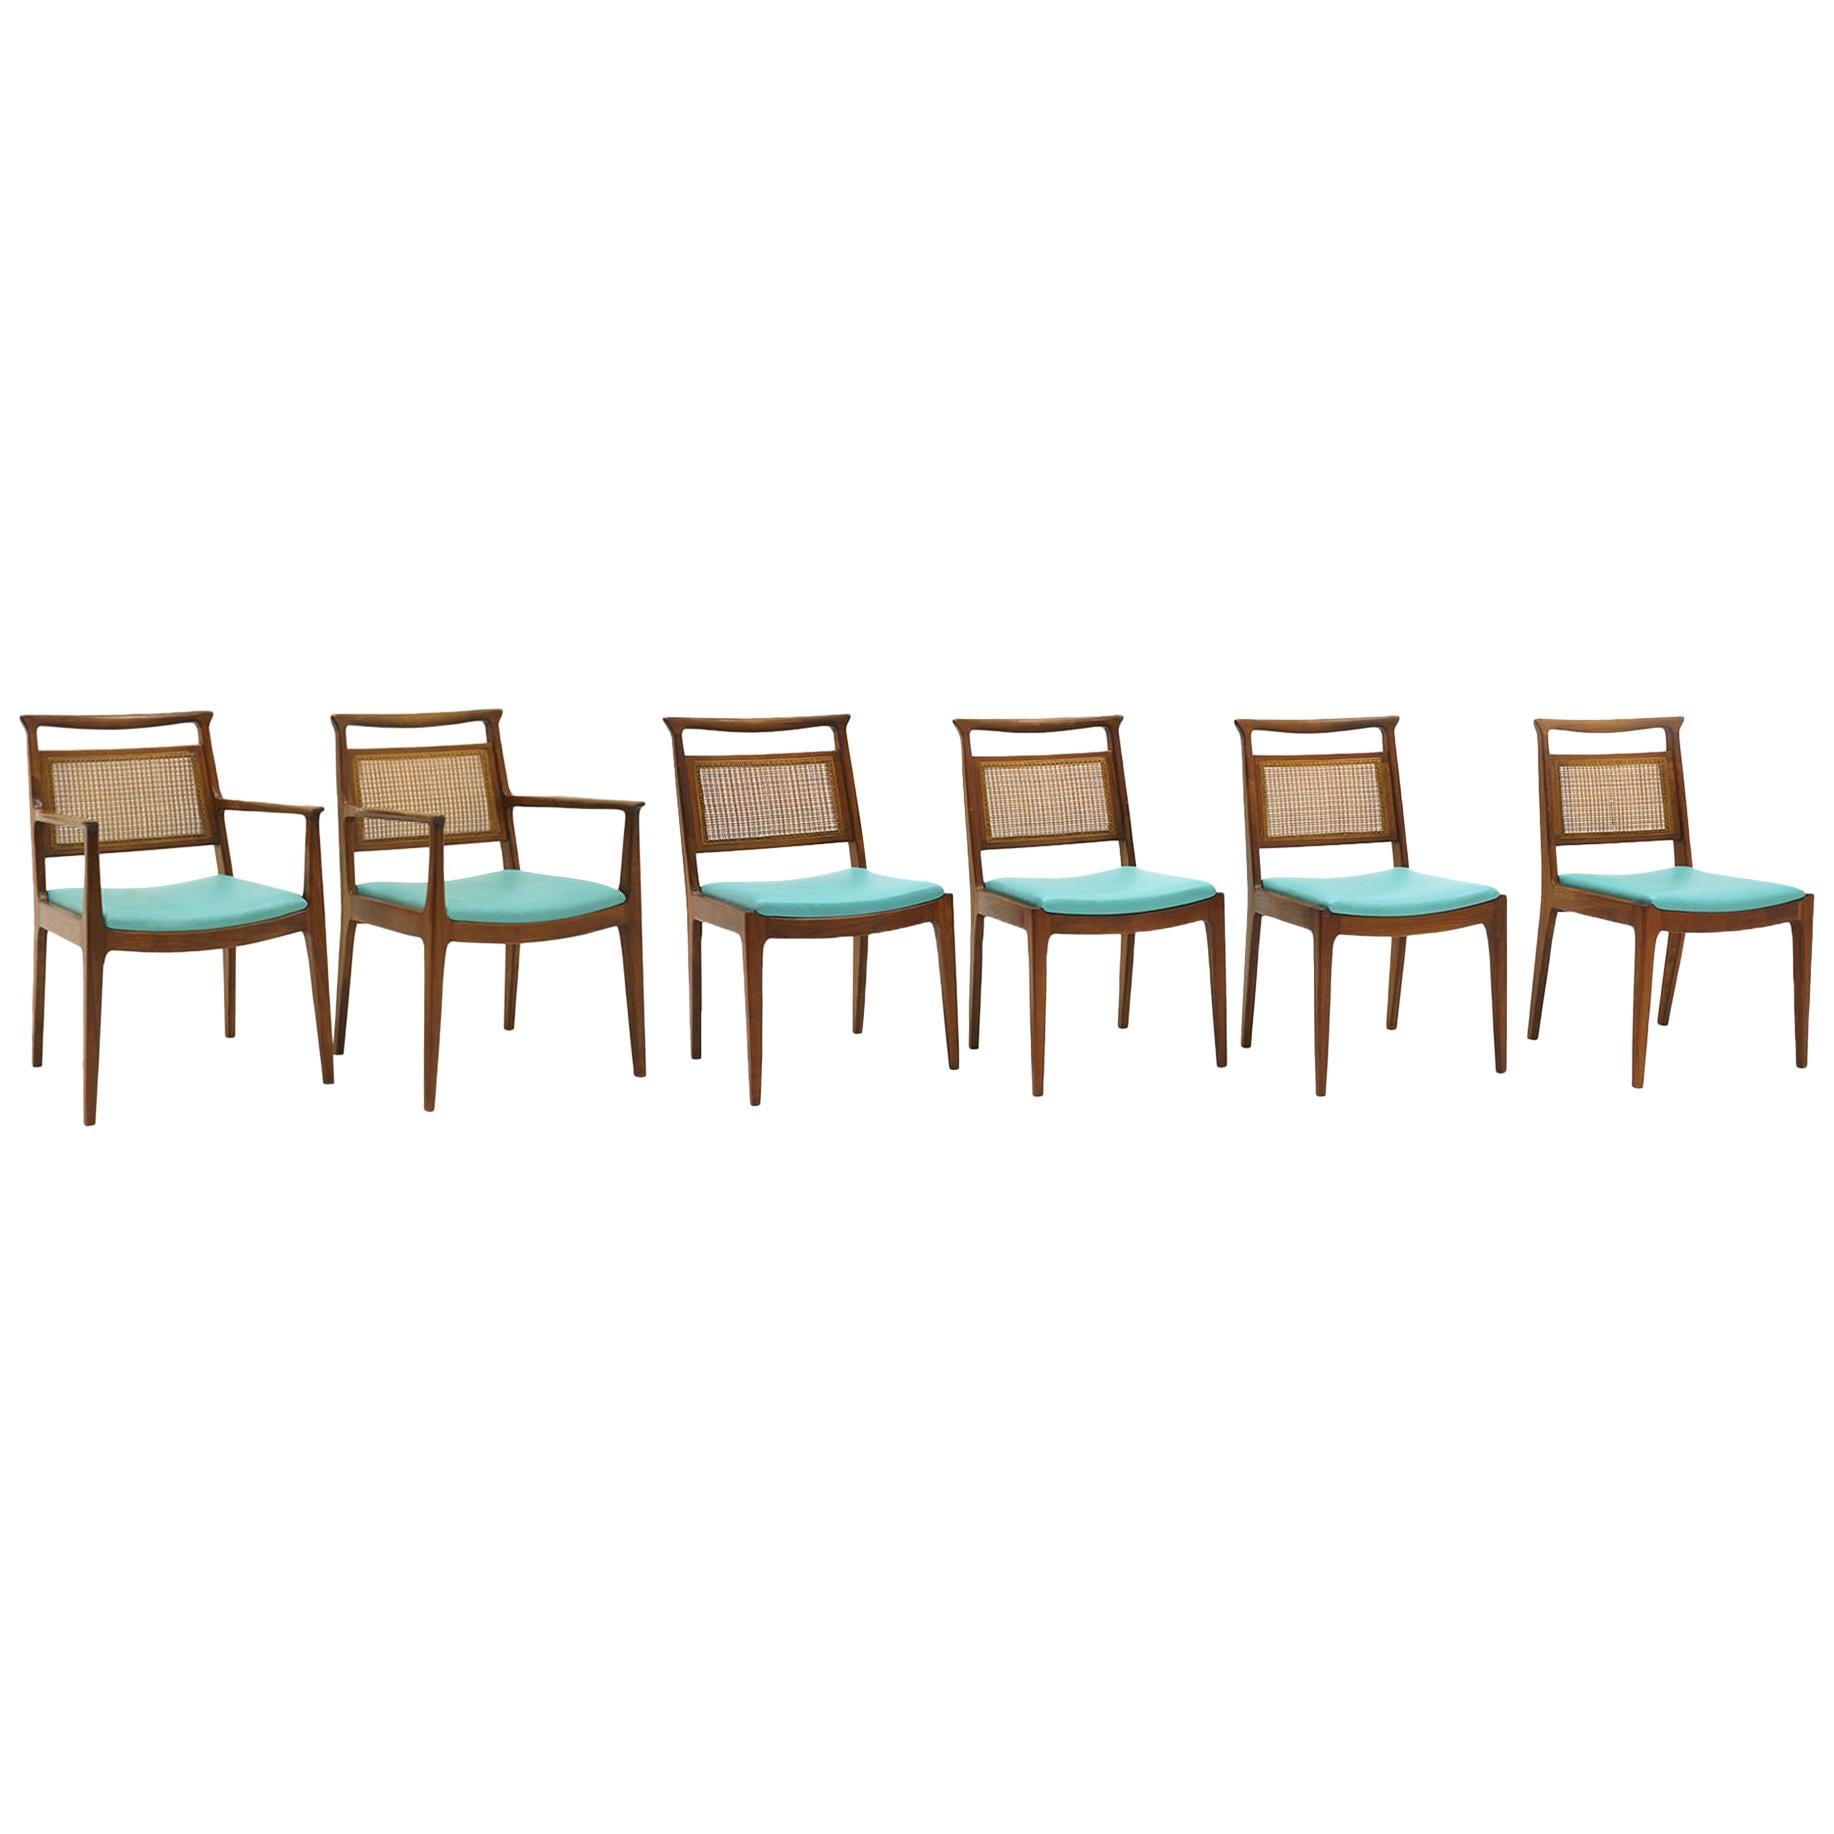 Six Dining Chairs by Edward Wormley, Walnut Frames, Cane Backs and Blue Seats